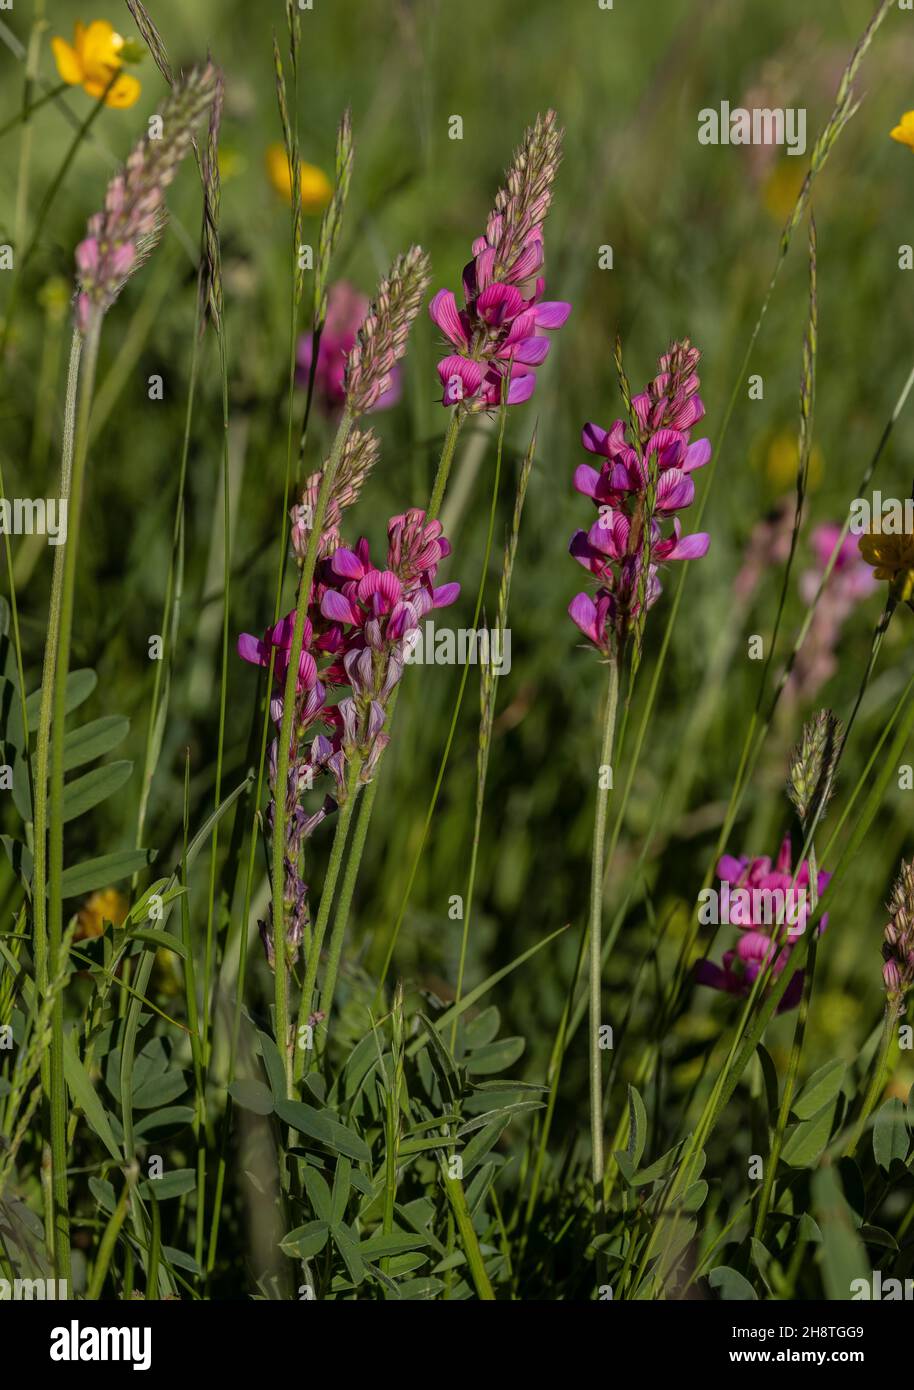 Common sainfoin, Onobrychis viciifolia, in flower in grassland. Stock Photo